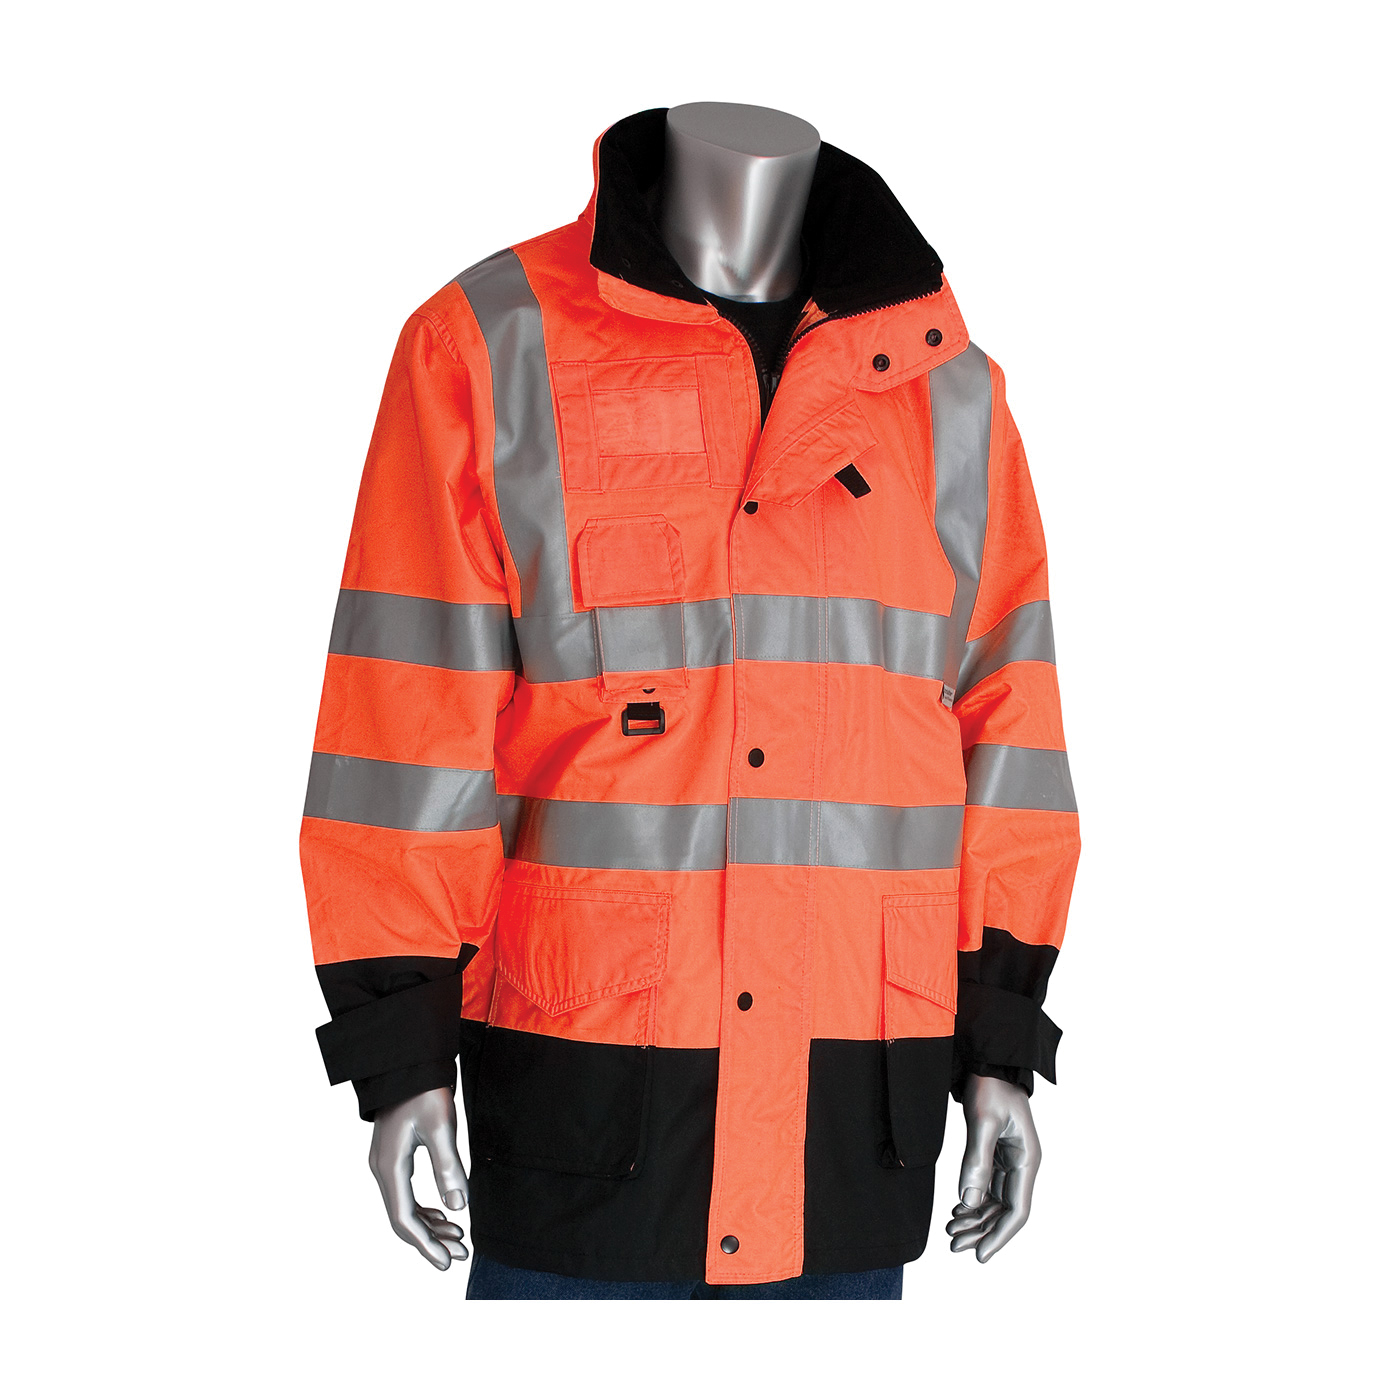 PIP® 343-1756-OR/M 7-in-1 All Condition Winter Coat With Inner Jacket and Vest Combination, Hi-Viz Orange, Polyester, 52.6 in Chest, Resists: Water, Specifications Met: ANSI 107 Class 3 Type R